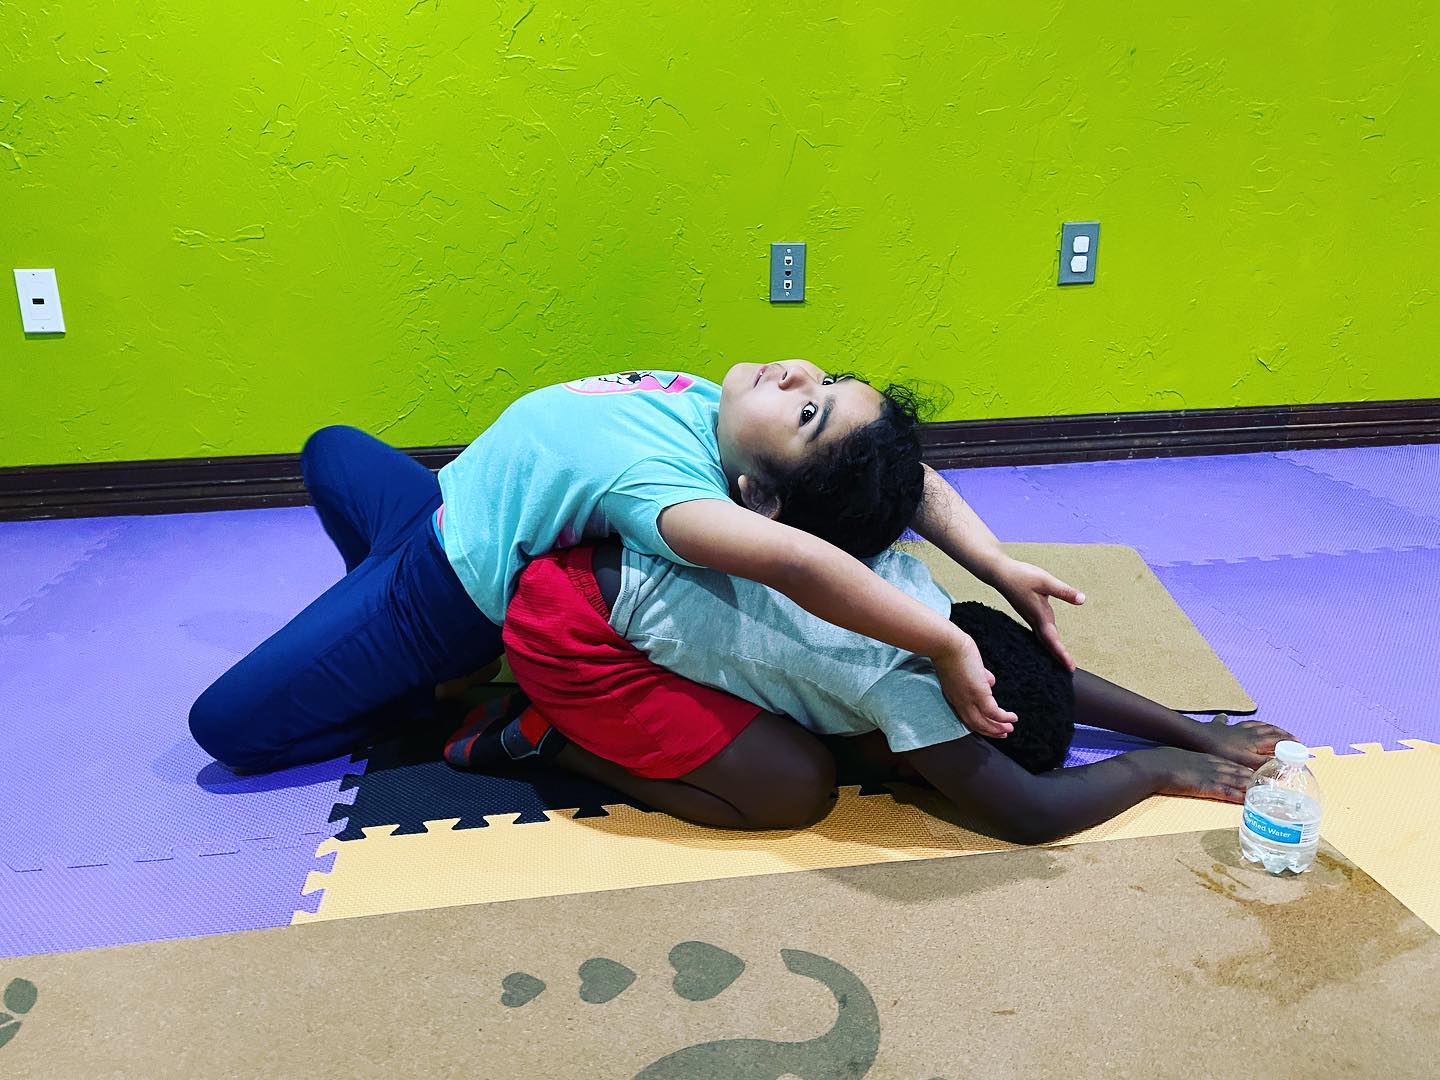 Just taking a moment to lay out on a warm rock under the sun to catch our breath after our swim…partner poses are so much fun but they also require us to learn how to work together as we follow directions.

#yoga #kidsyoga #kidsfun #mindfulness #yogicubs #partnerposes #imagination #mansfieldtx #arlingtontx #dfwkids